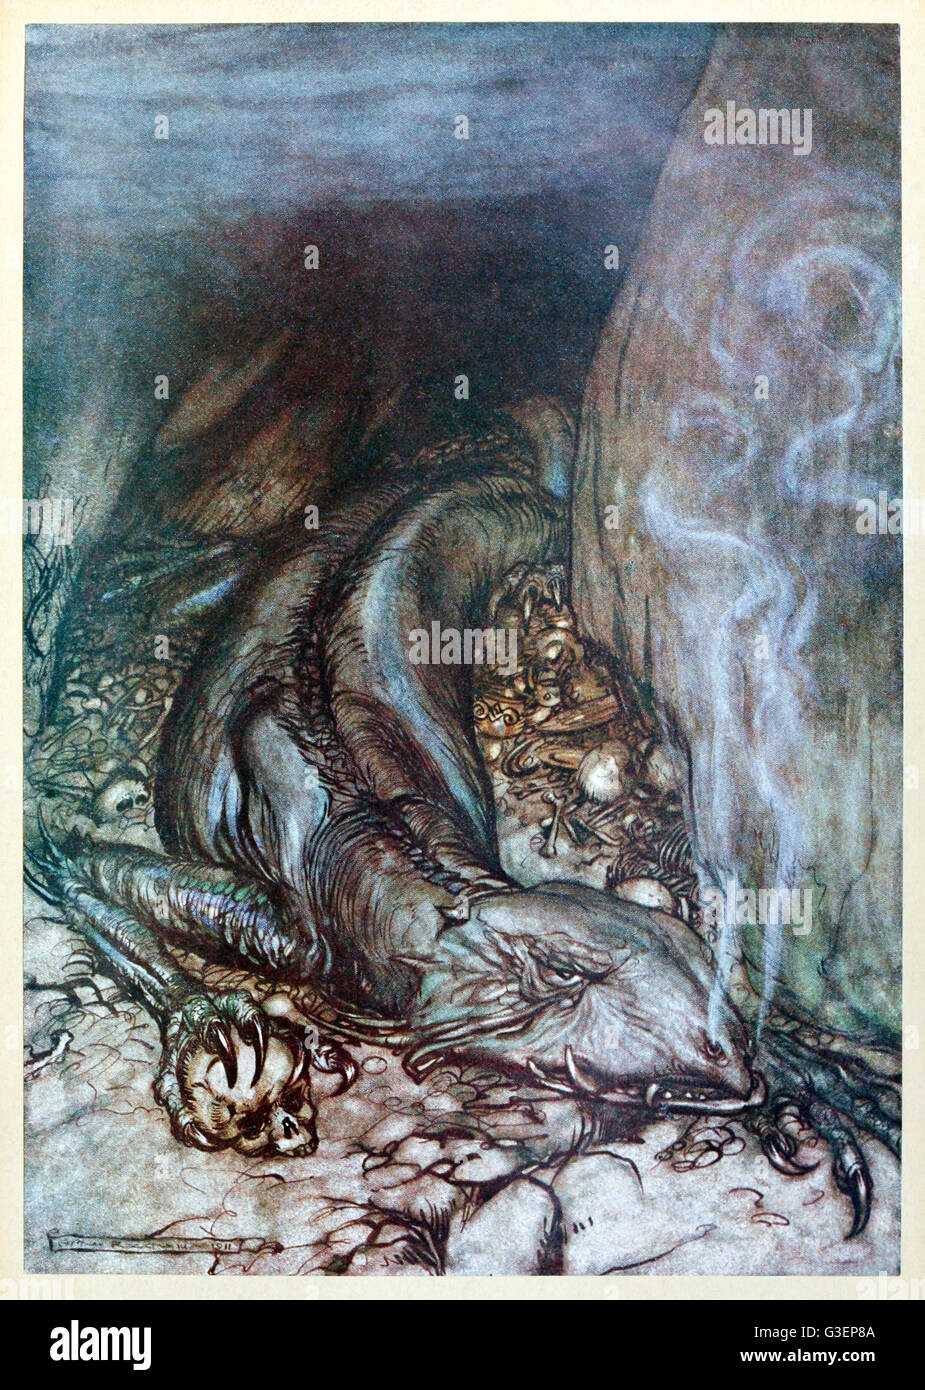 “In dragon’s form Father now watches the hoard” from 'Siegfried & The Twilight of the Gods' illustrated by Arthur Rackham (1867-1939). See description for more information. Stock Photo